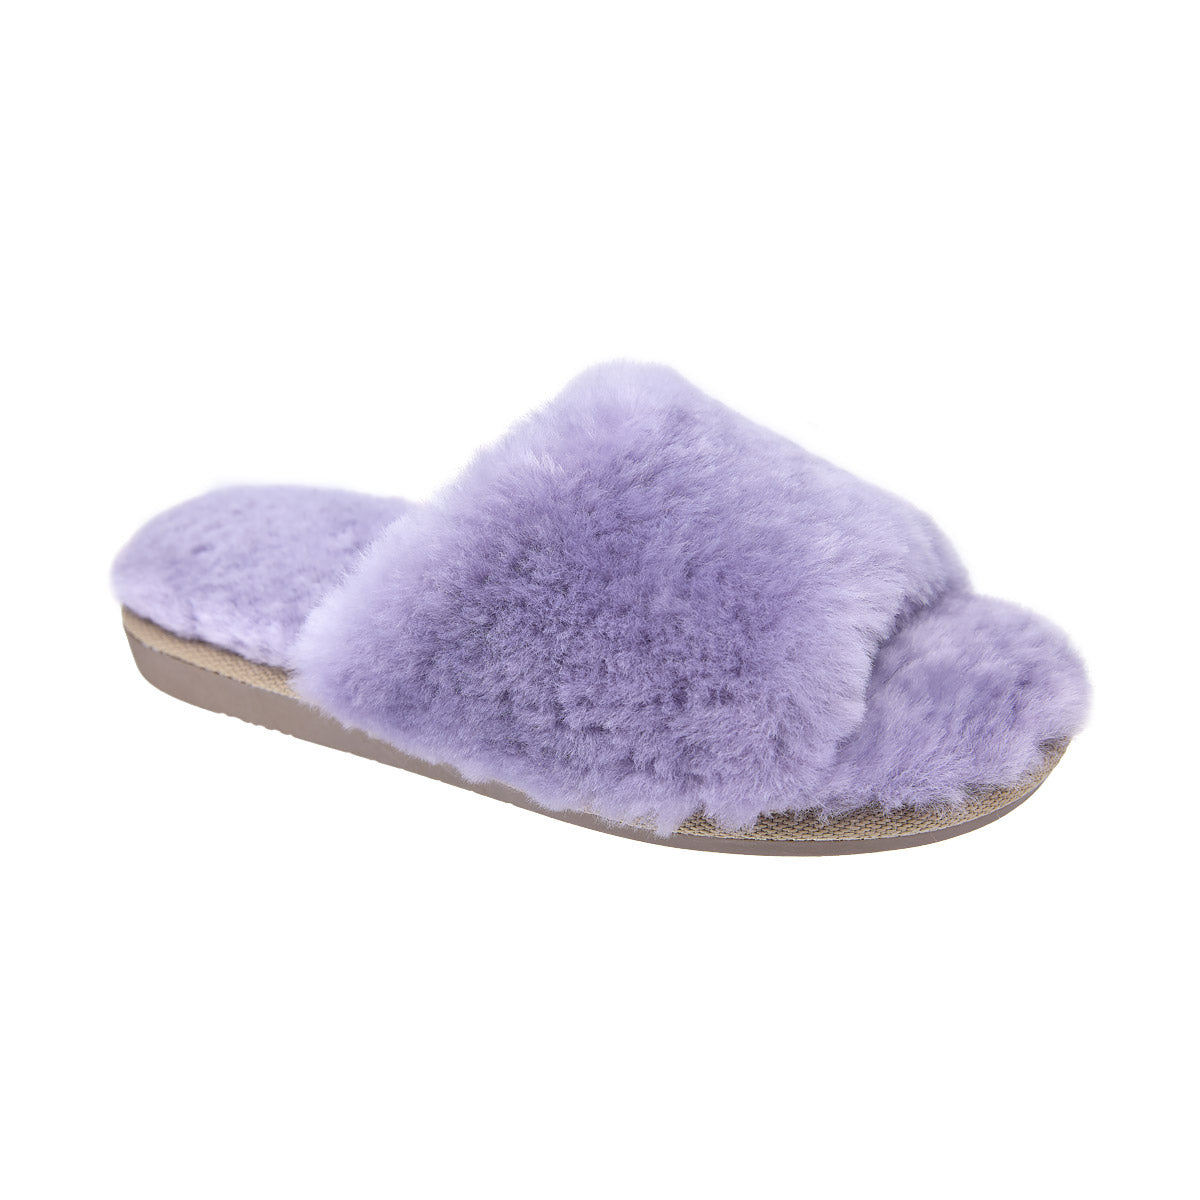 ANOA Lavender sheep slippers